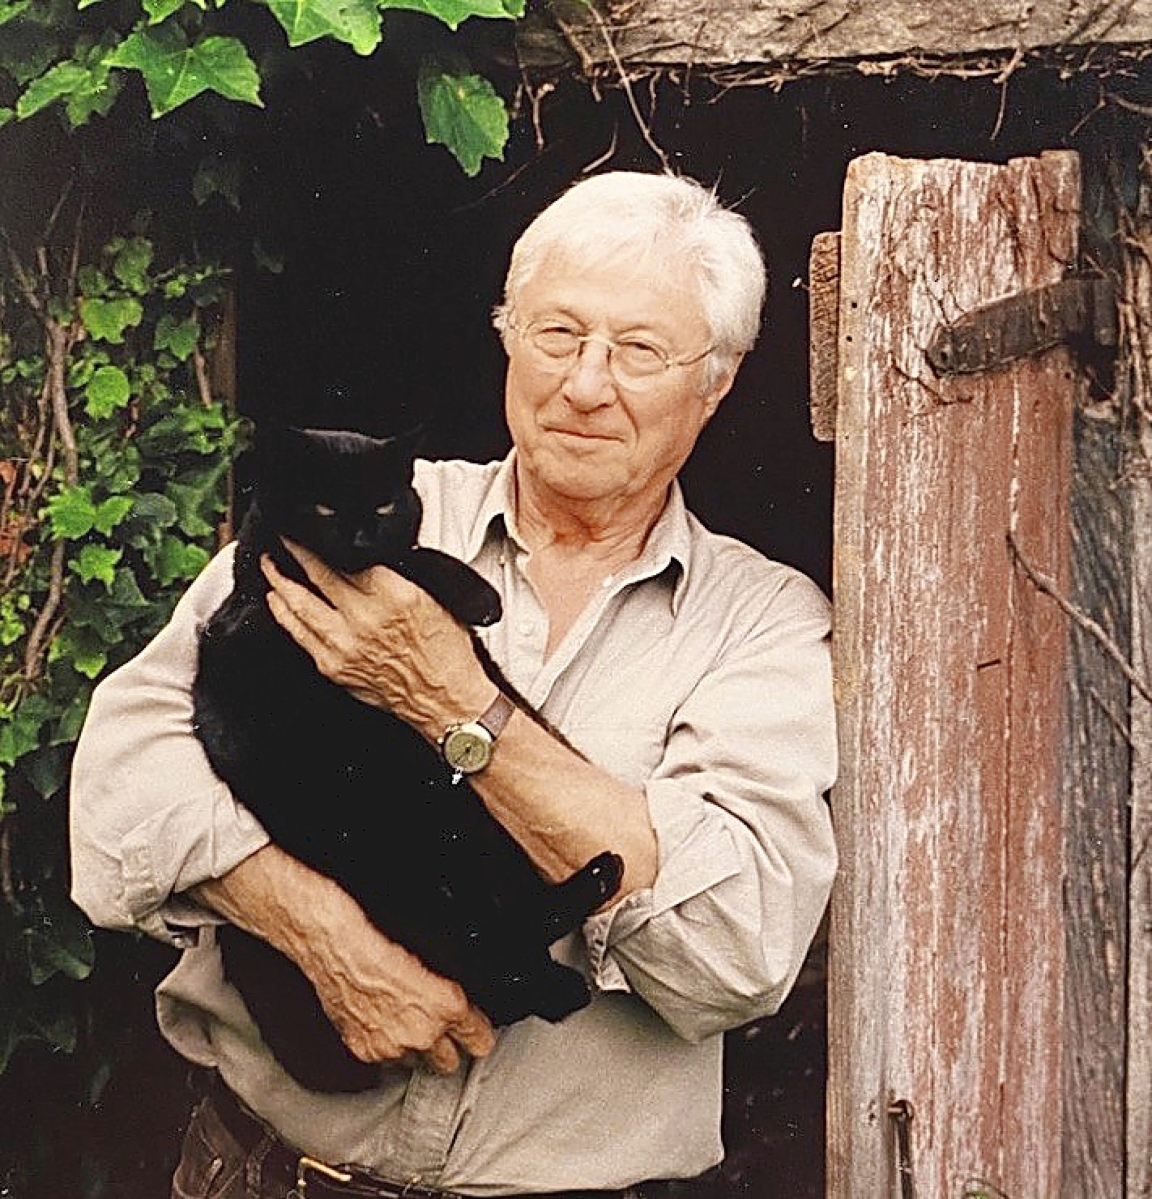 Keno standing with cat “Blackie” in front of the doorway of the Nineteenth Century stone “Smoke house” which still stands today on the Keno property.